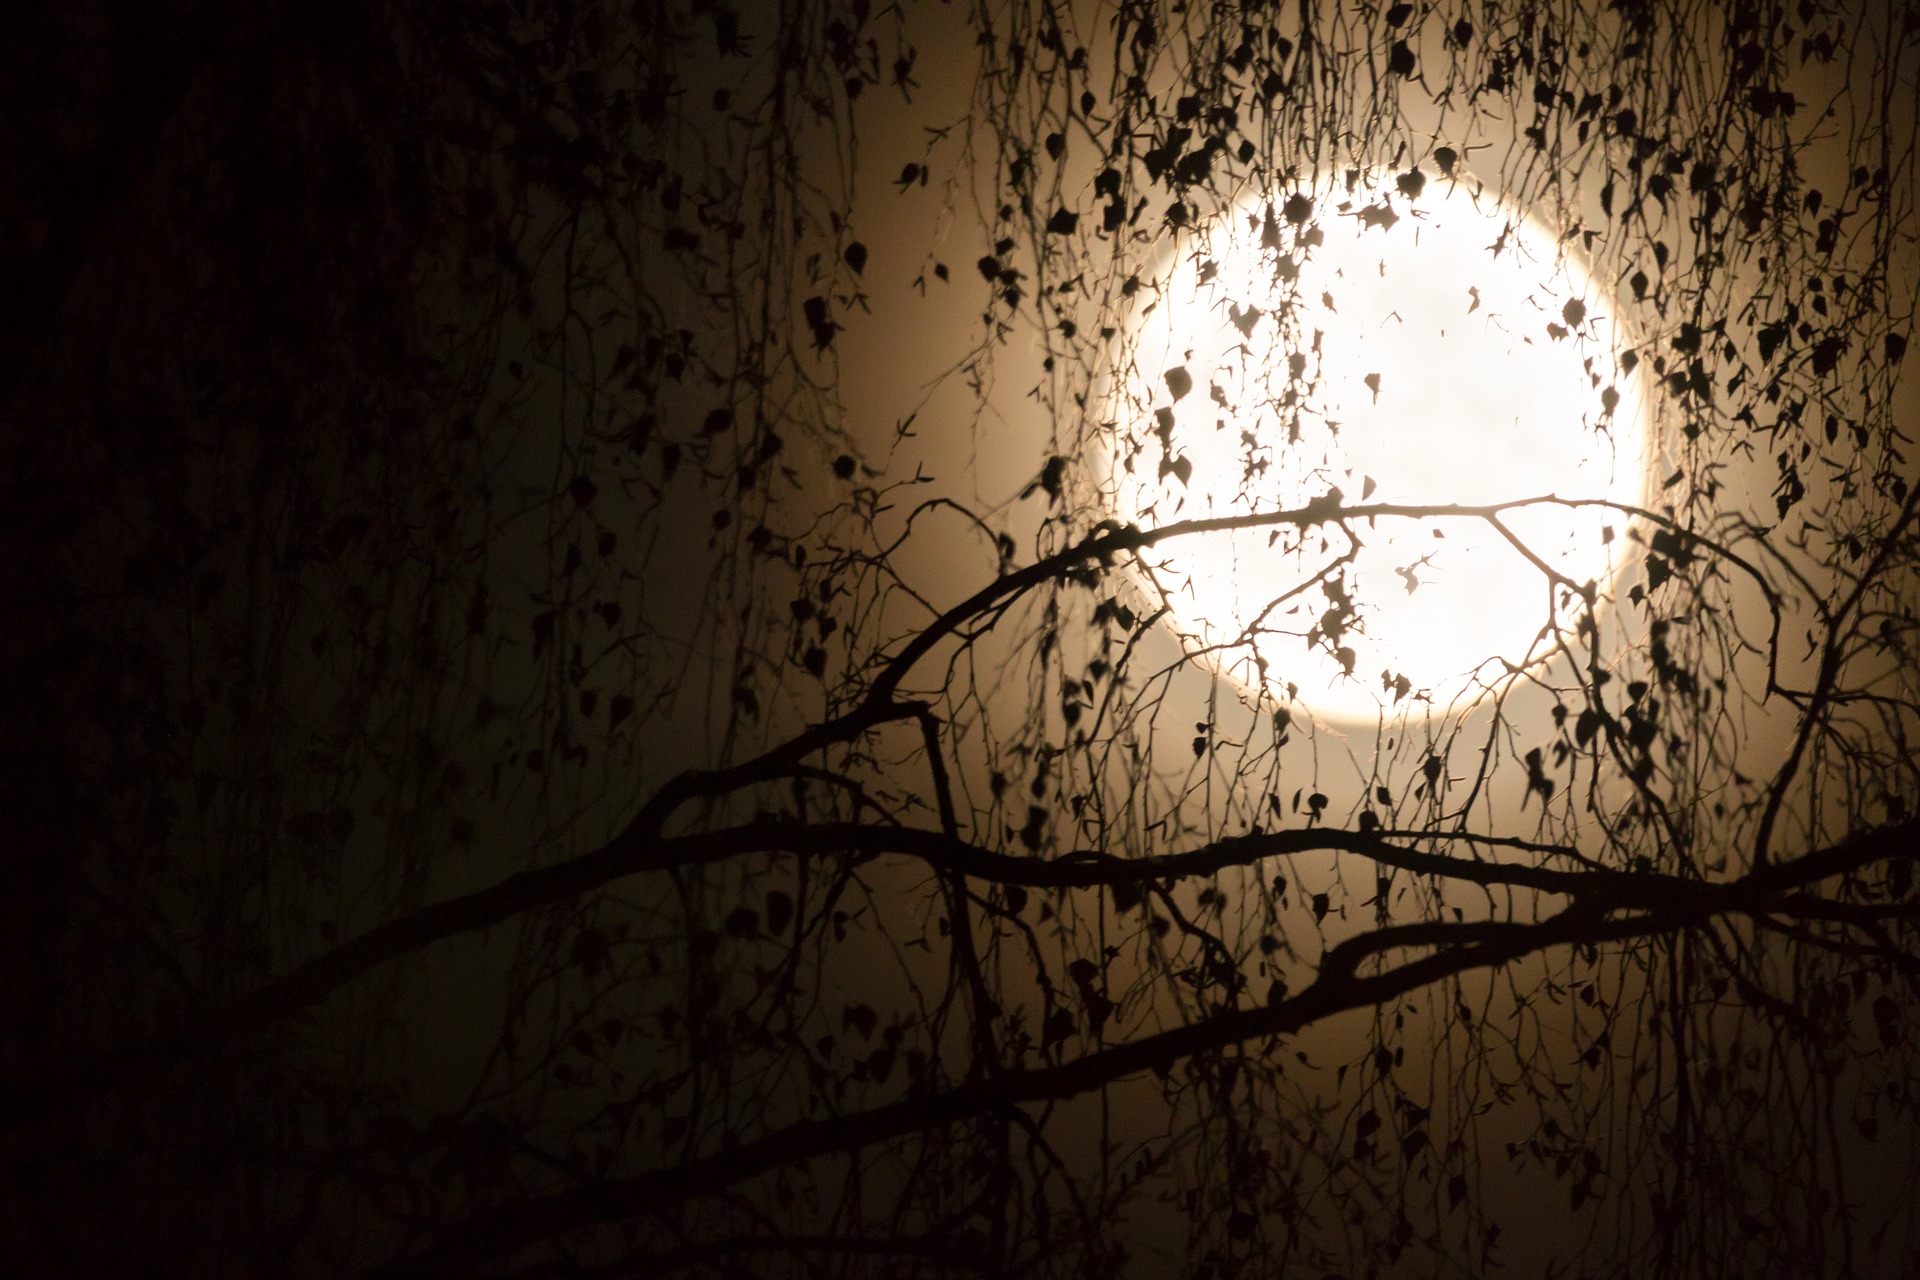 Moon behind branches